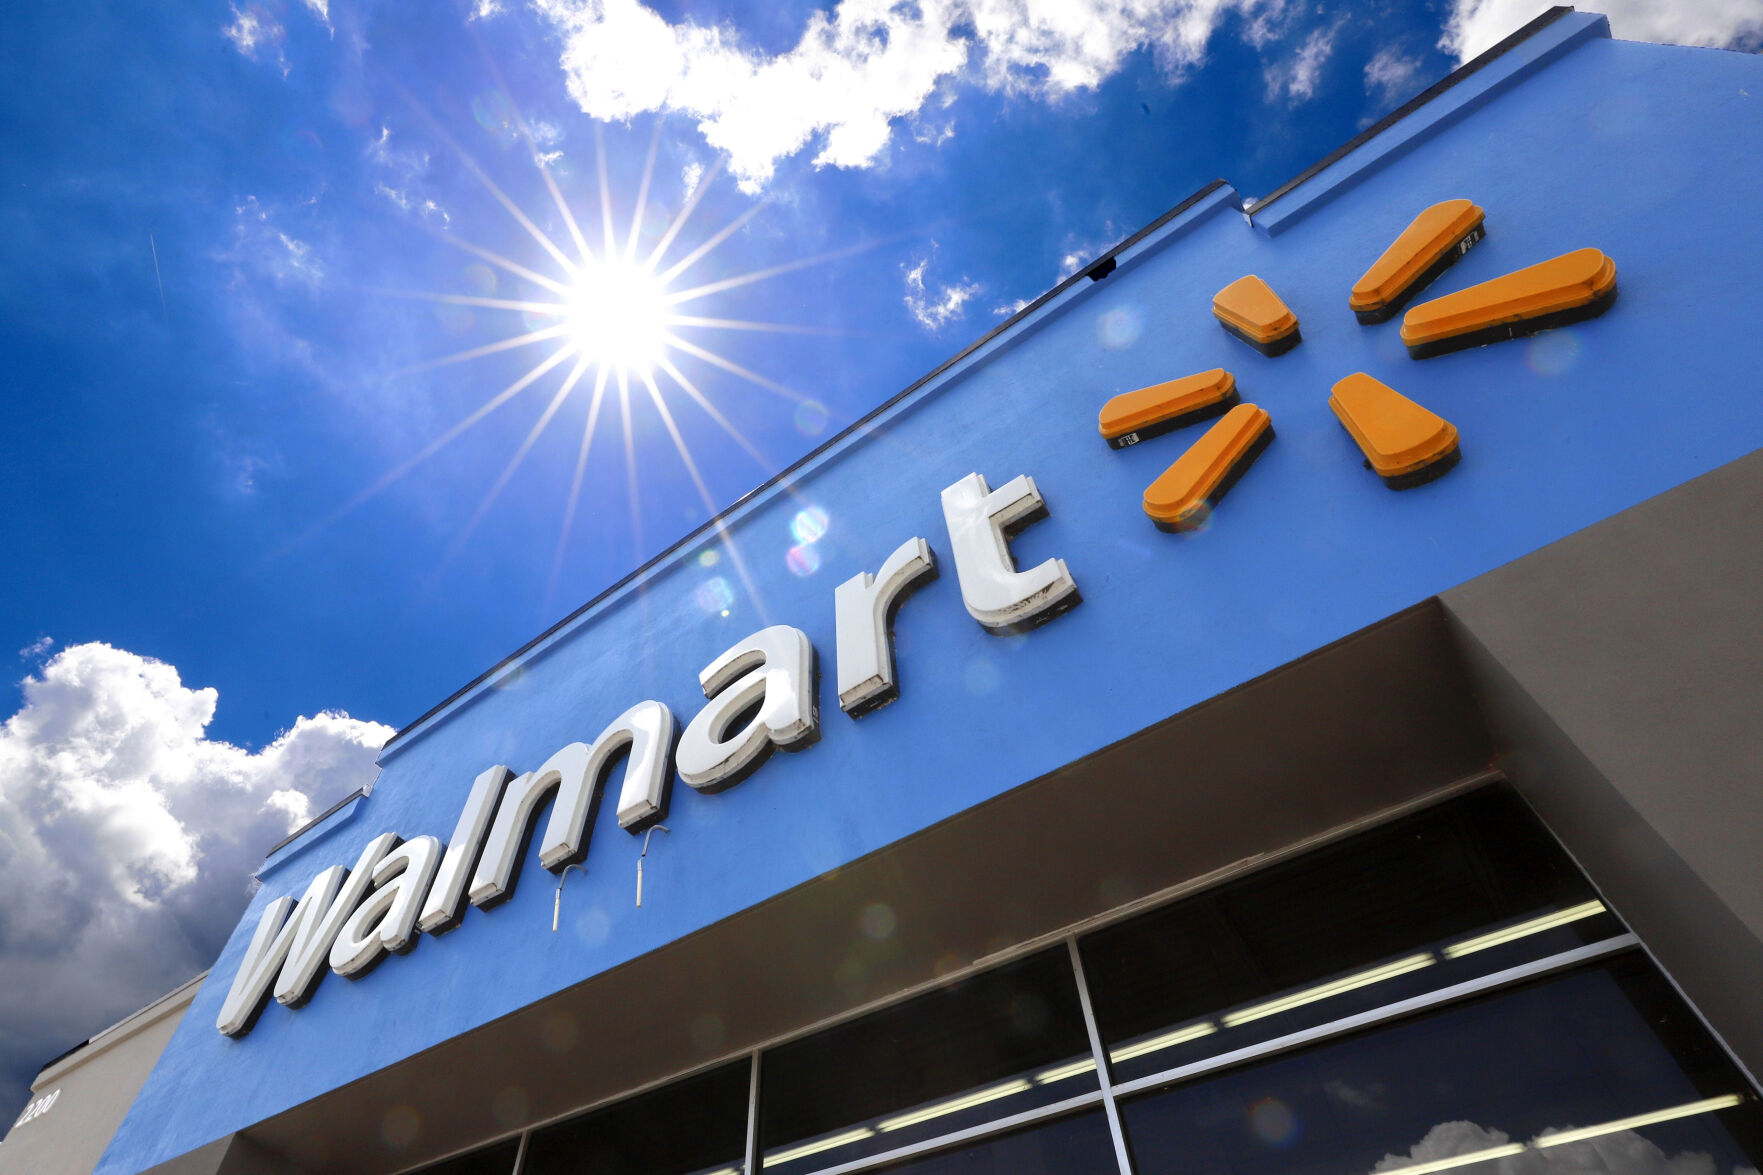 <p>FILE - This June 25, 2019, file photo shows the entrance to a Walmart in Pittsburgh. Two of the largest U.S pharmacy chains have agreed in principle to pay about $10 billion combined to settle lawsuits over the toll of powerful prescription opioids, Wednesday, Nov. 2, 2022. In addition to the deals with CVS Health and Walgreens, a lawyer for local governments says settlement conversations are continuing with Walmart. (AP Photo/Gene J. Puskar, File)</p>   PHOTO CREDIT: Gene J. Puskar - staff, AP